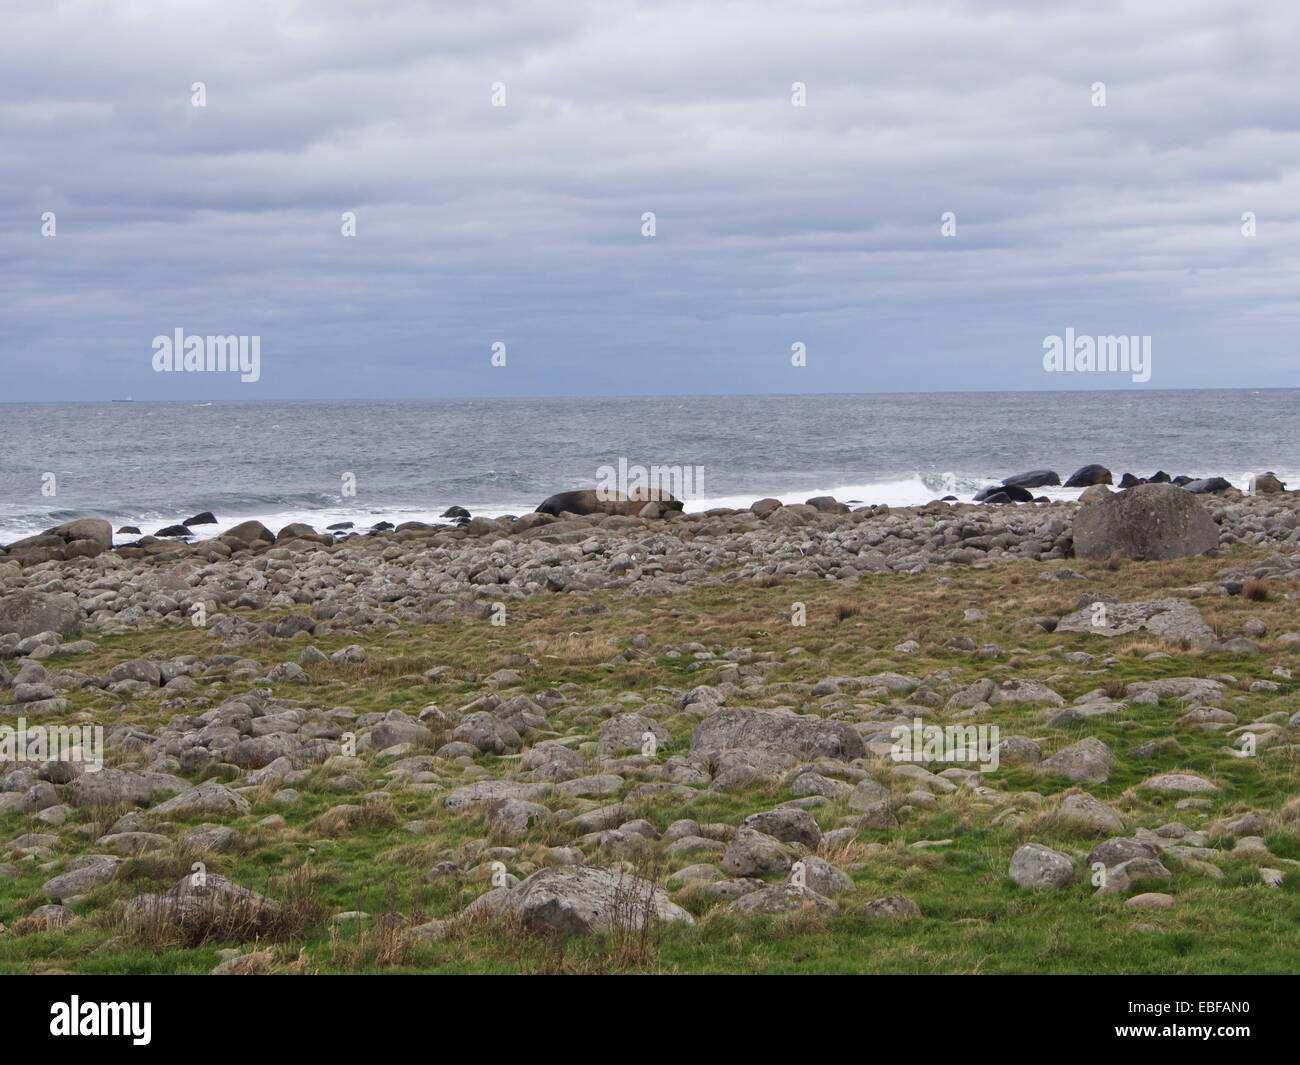 A dark day with autumn or winter storms on Jaeren, west coast of Norway near Stavanger waves breaking over stones and beach Stock Photo